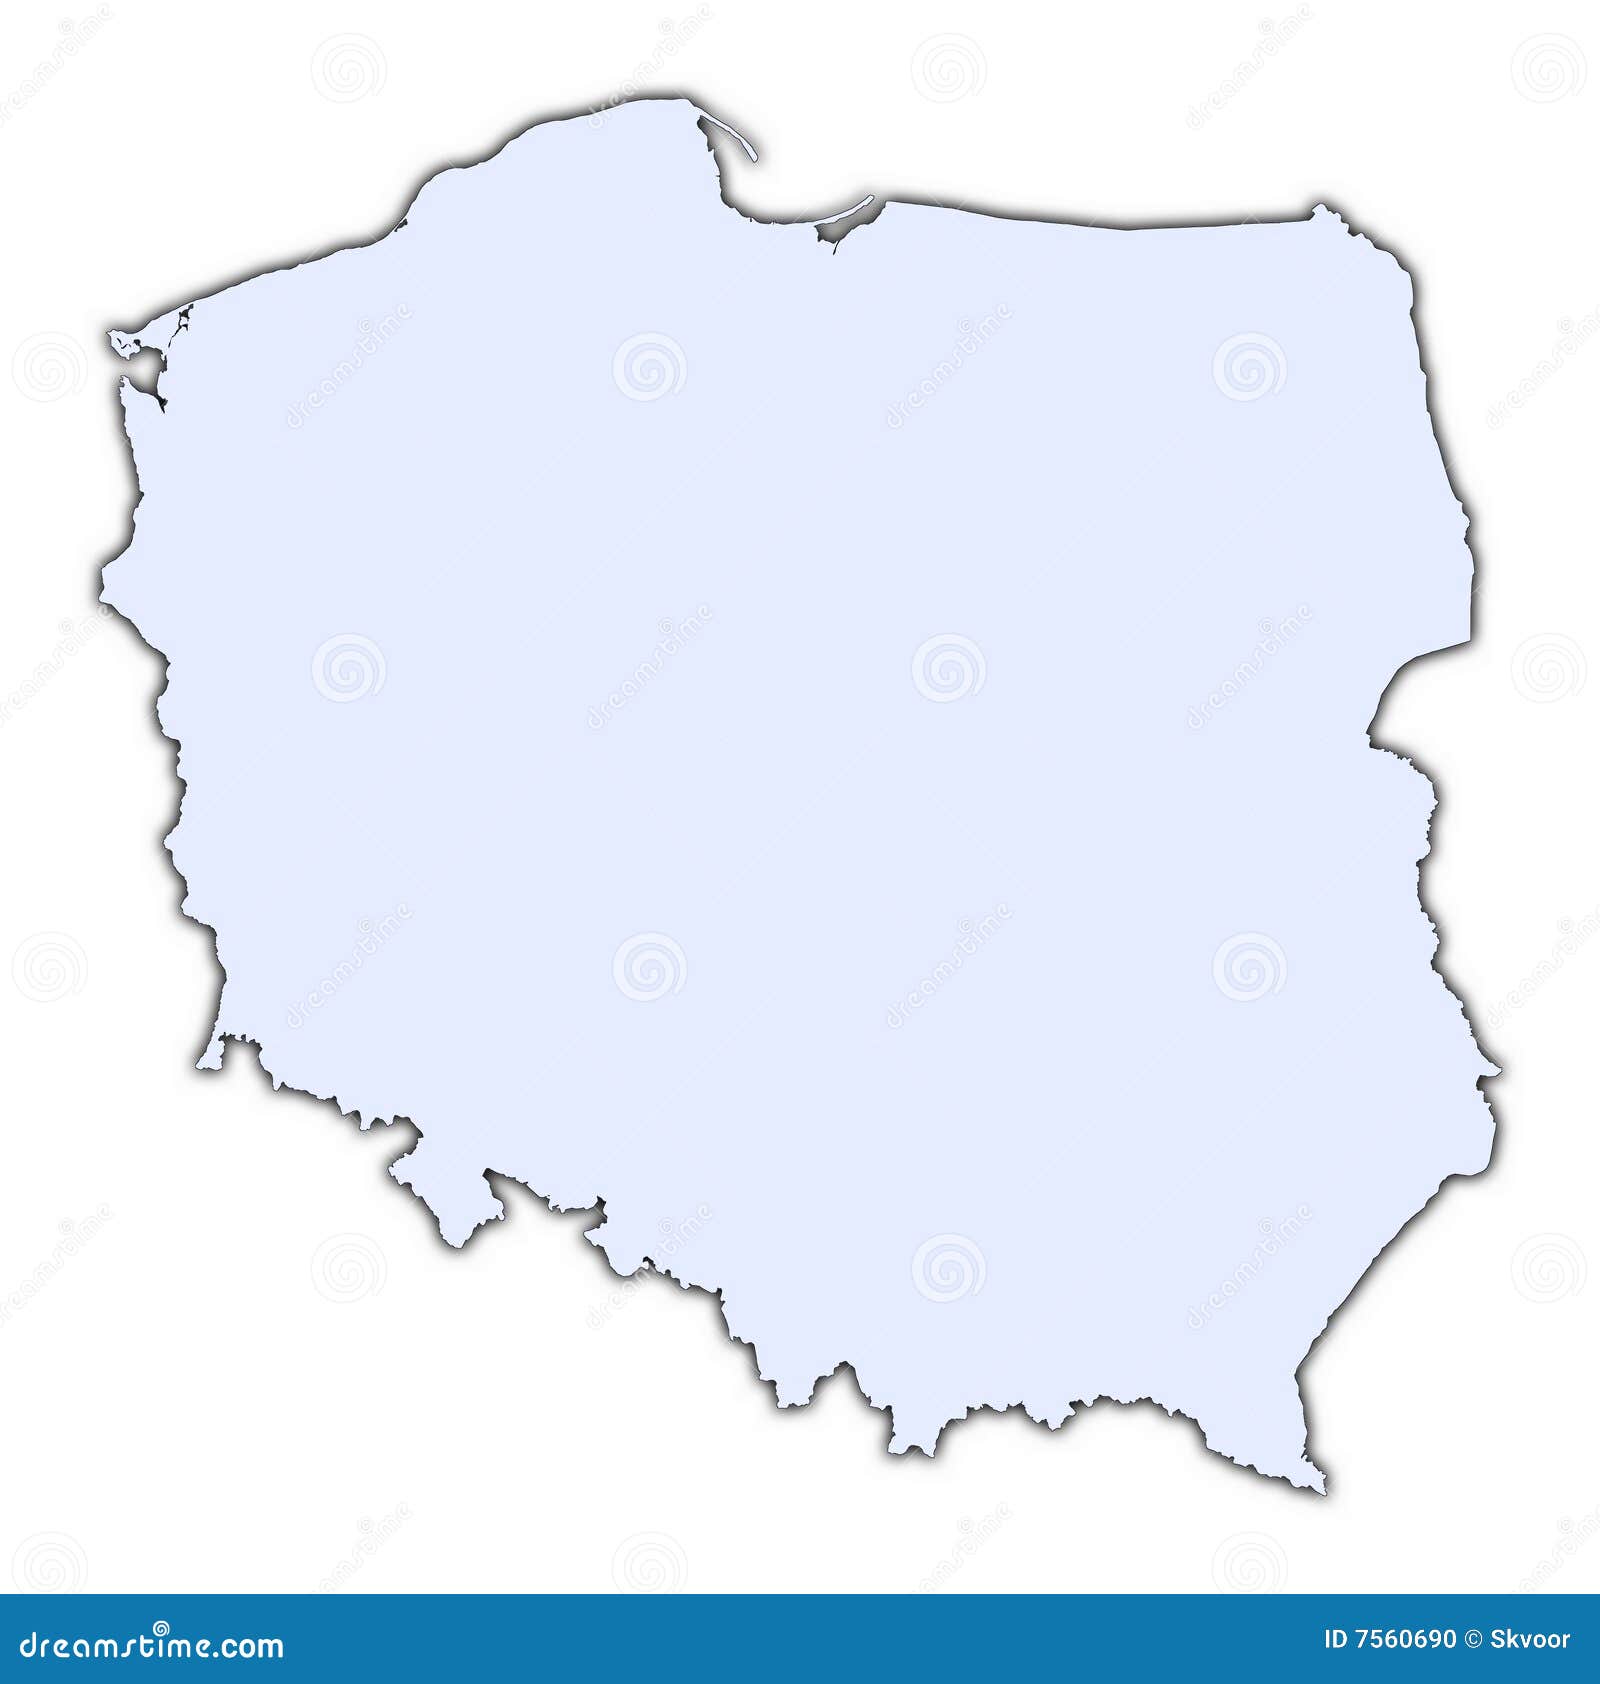 clipart map of poland - photo #47